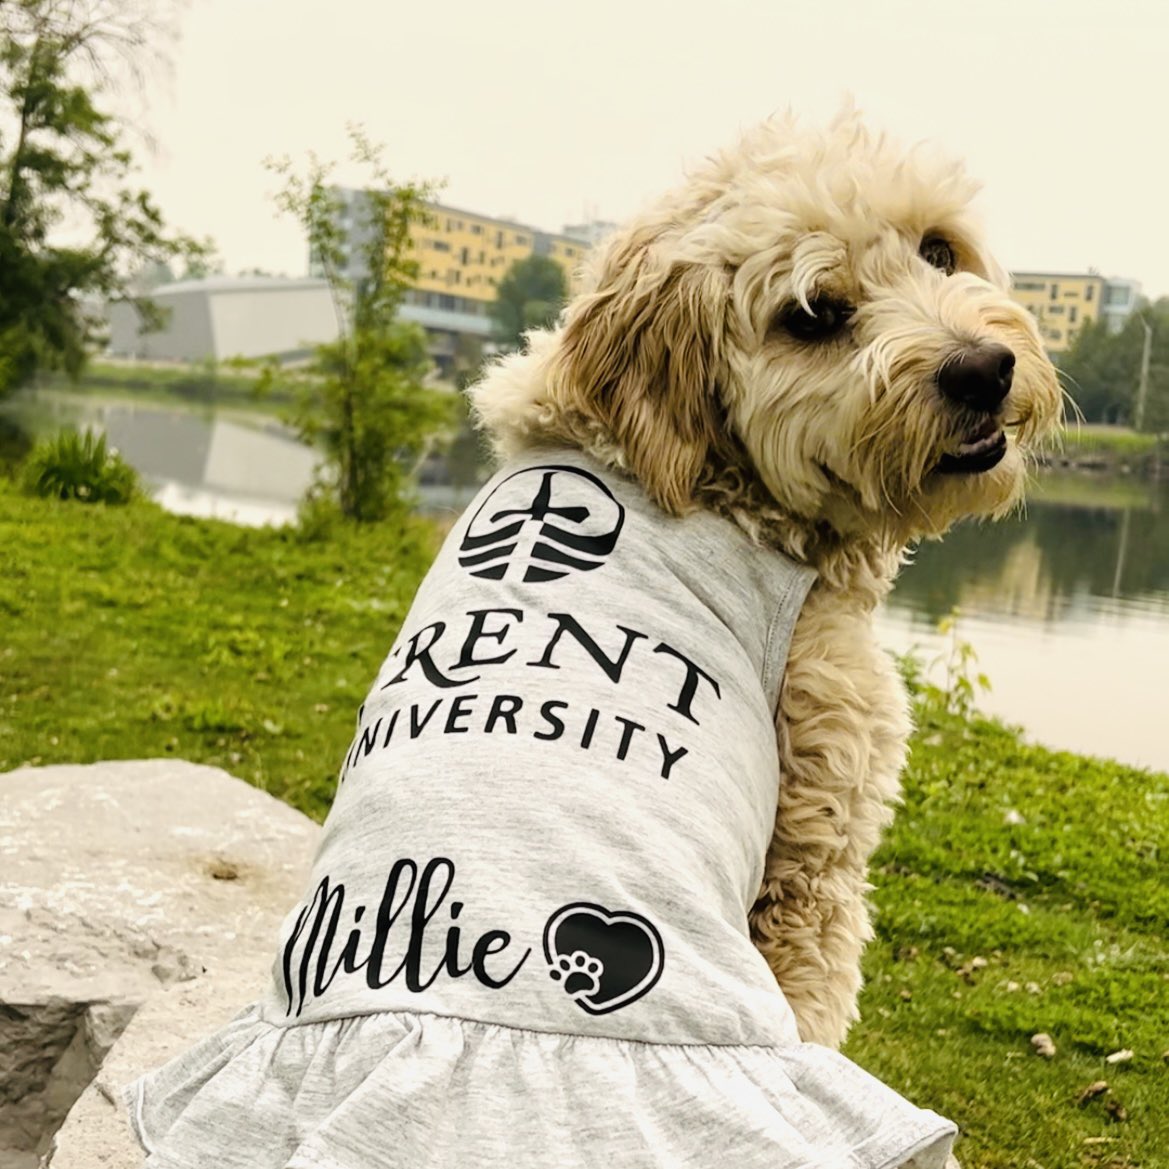 Out for a stroll to scope out convocation setup…  Millie approved 👍 @TrentUniversity